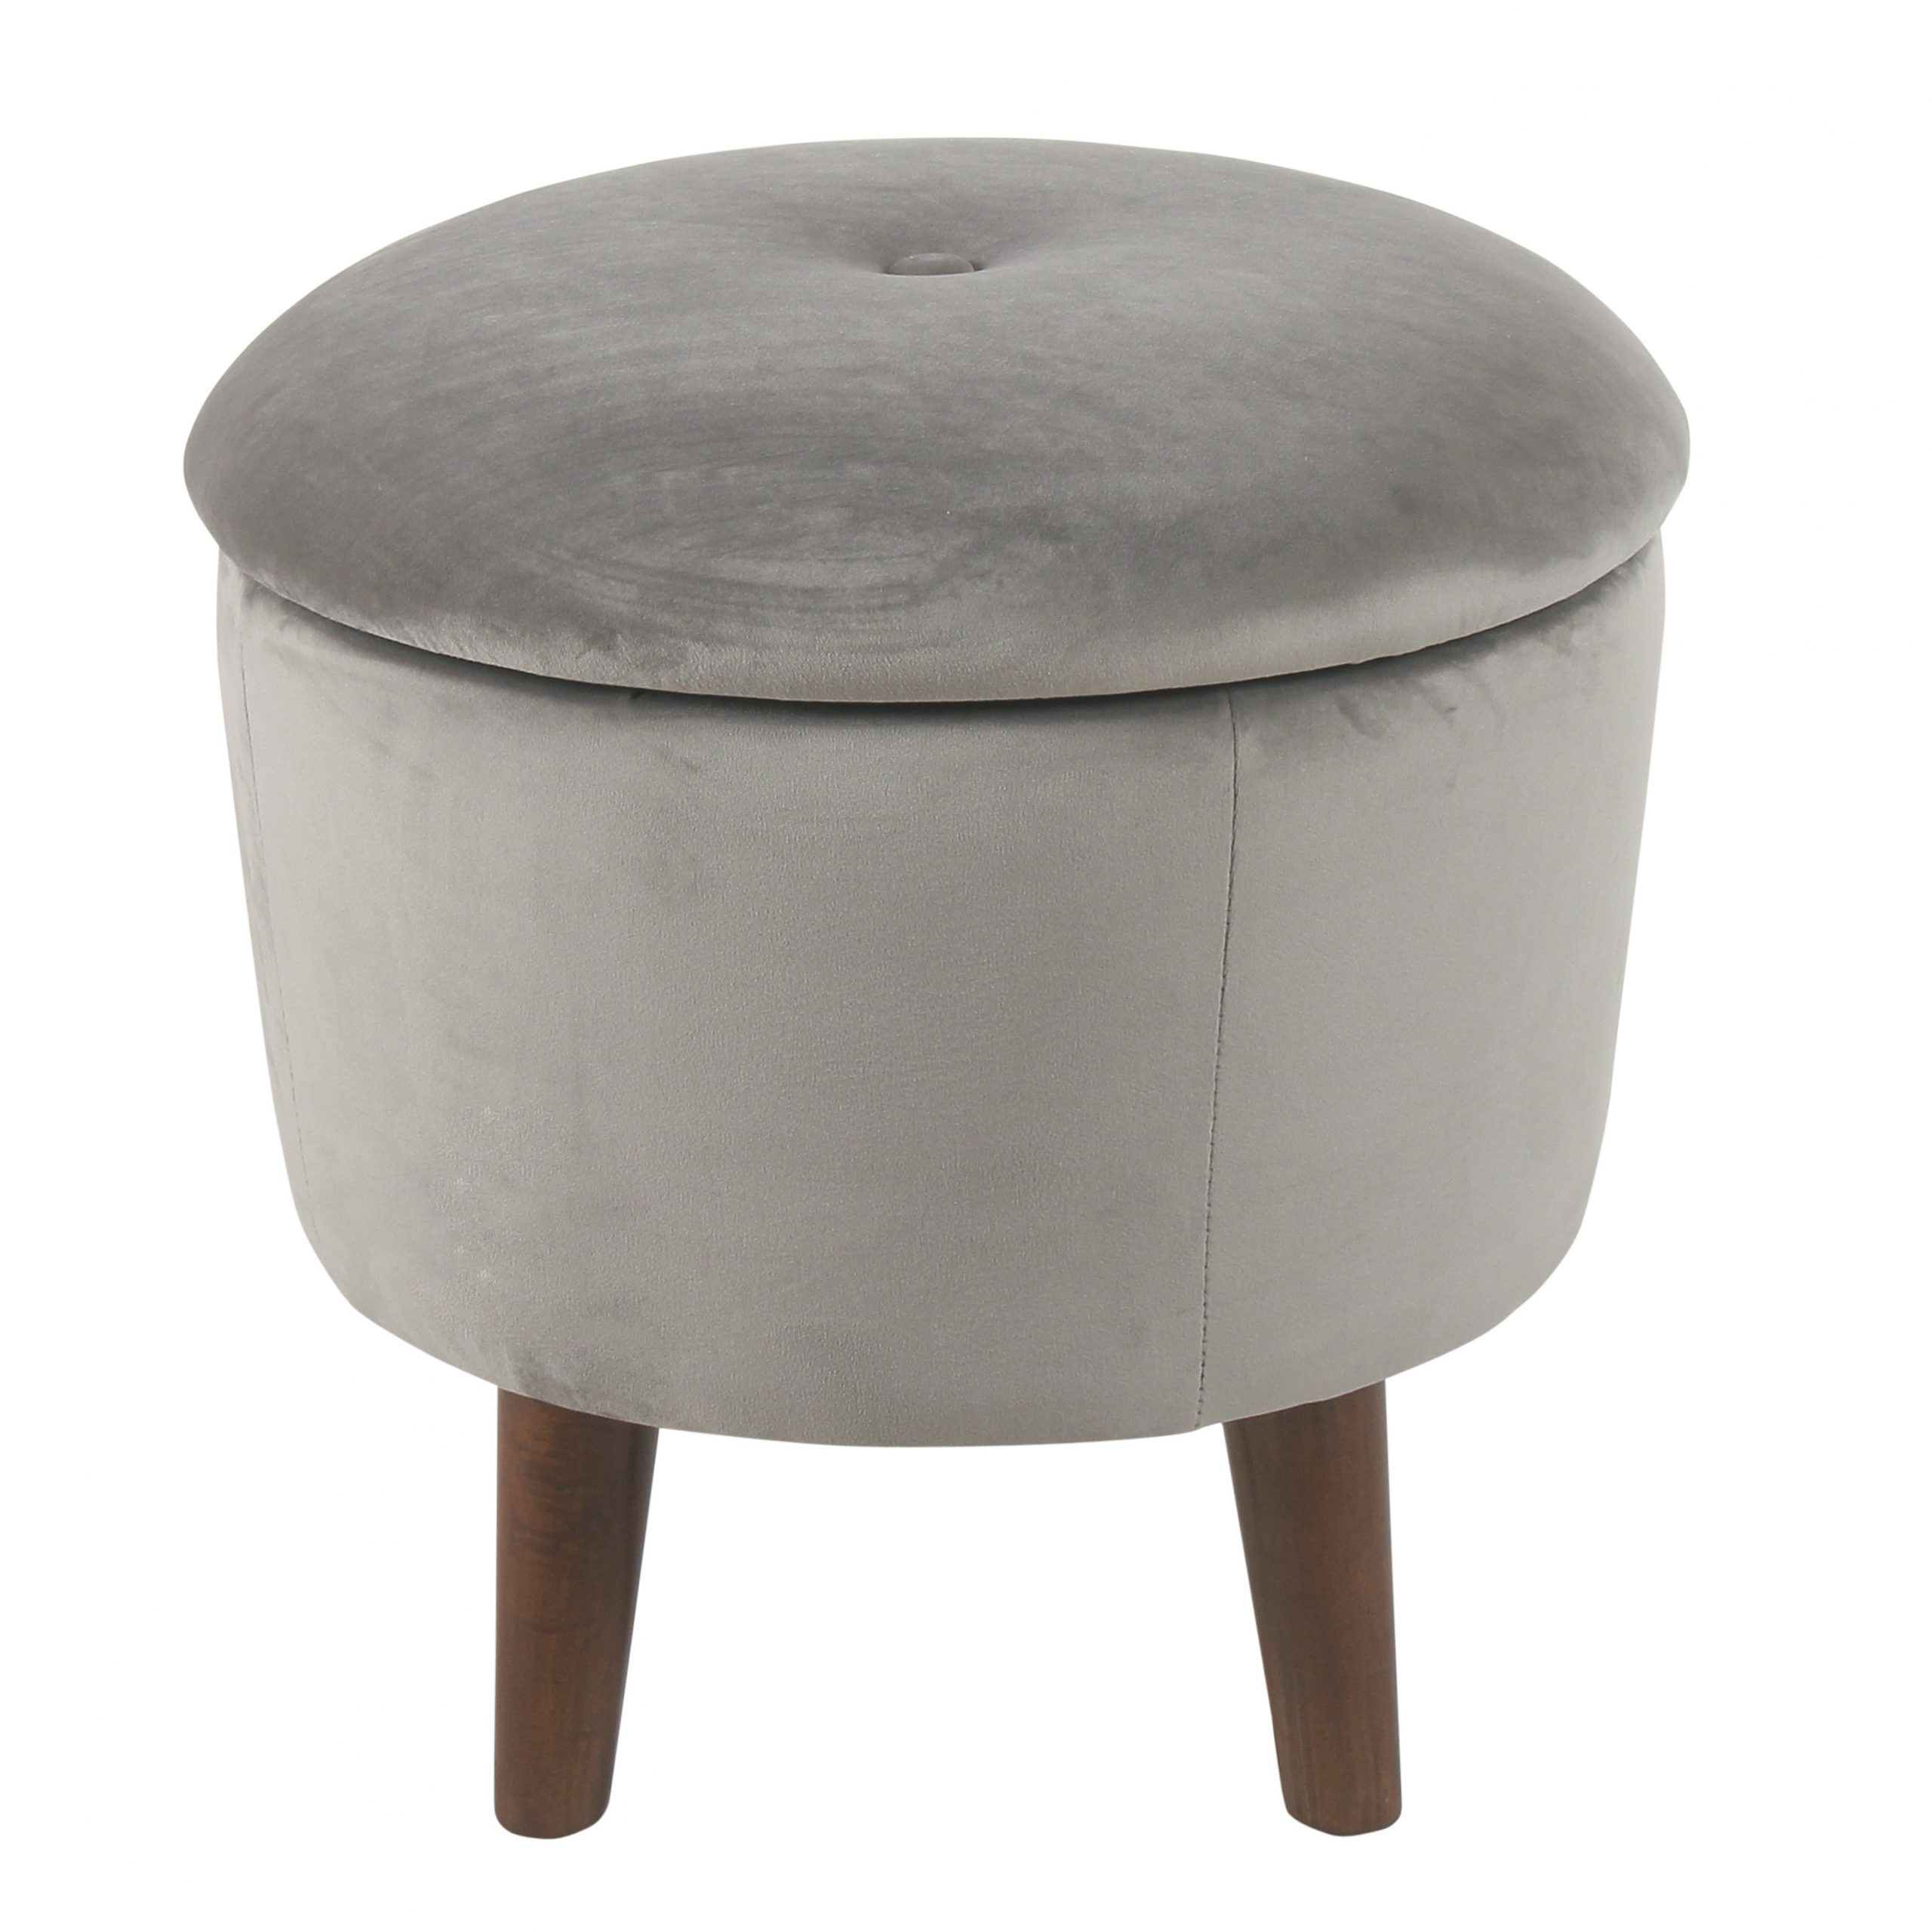 Velvet Ribbed Fabric Round Storage Ottomans Inside Most Recent Homepop Modern Round Velvet Tufted Storage Ottoman, Multiple Colors (View 3 of 10)